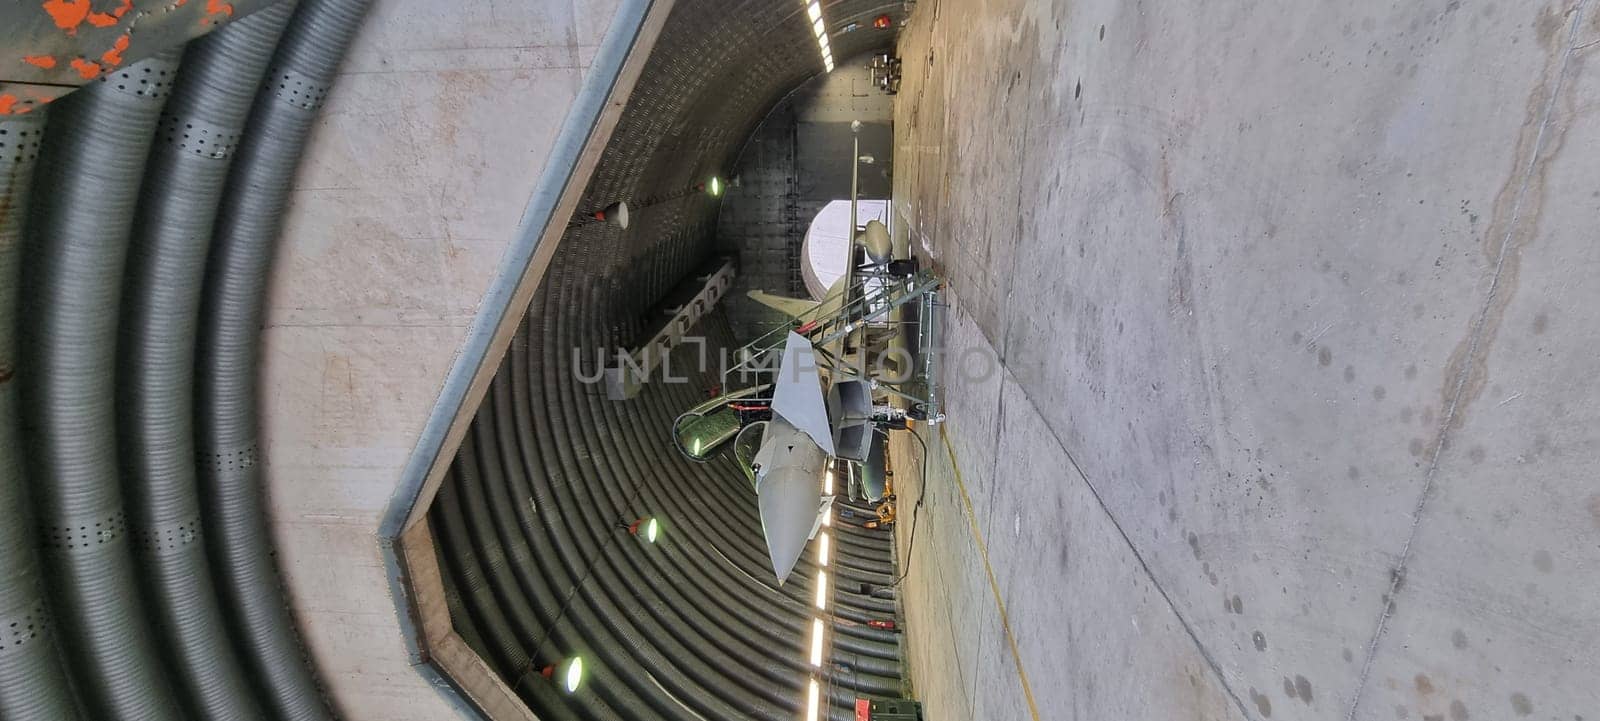 Modern Defense Aircraft in Armored Shelter Ready for Takeoff, Vertical Photo by FlightVideo